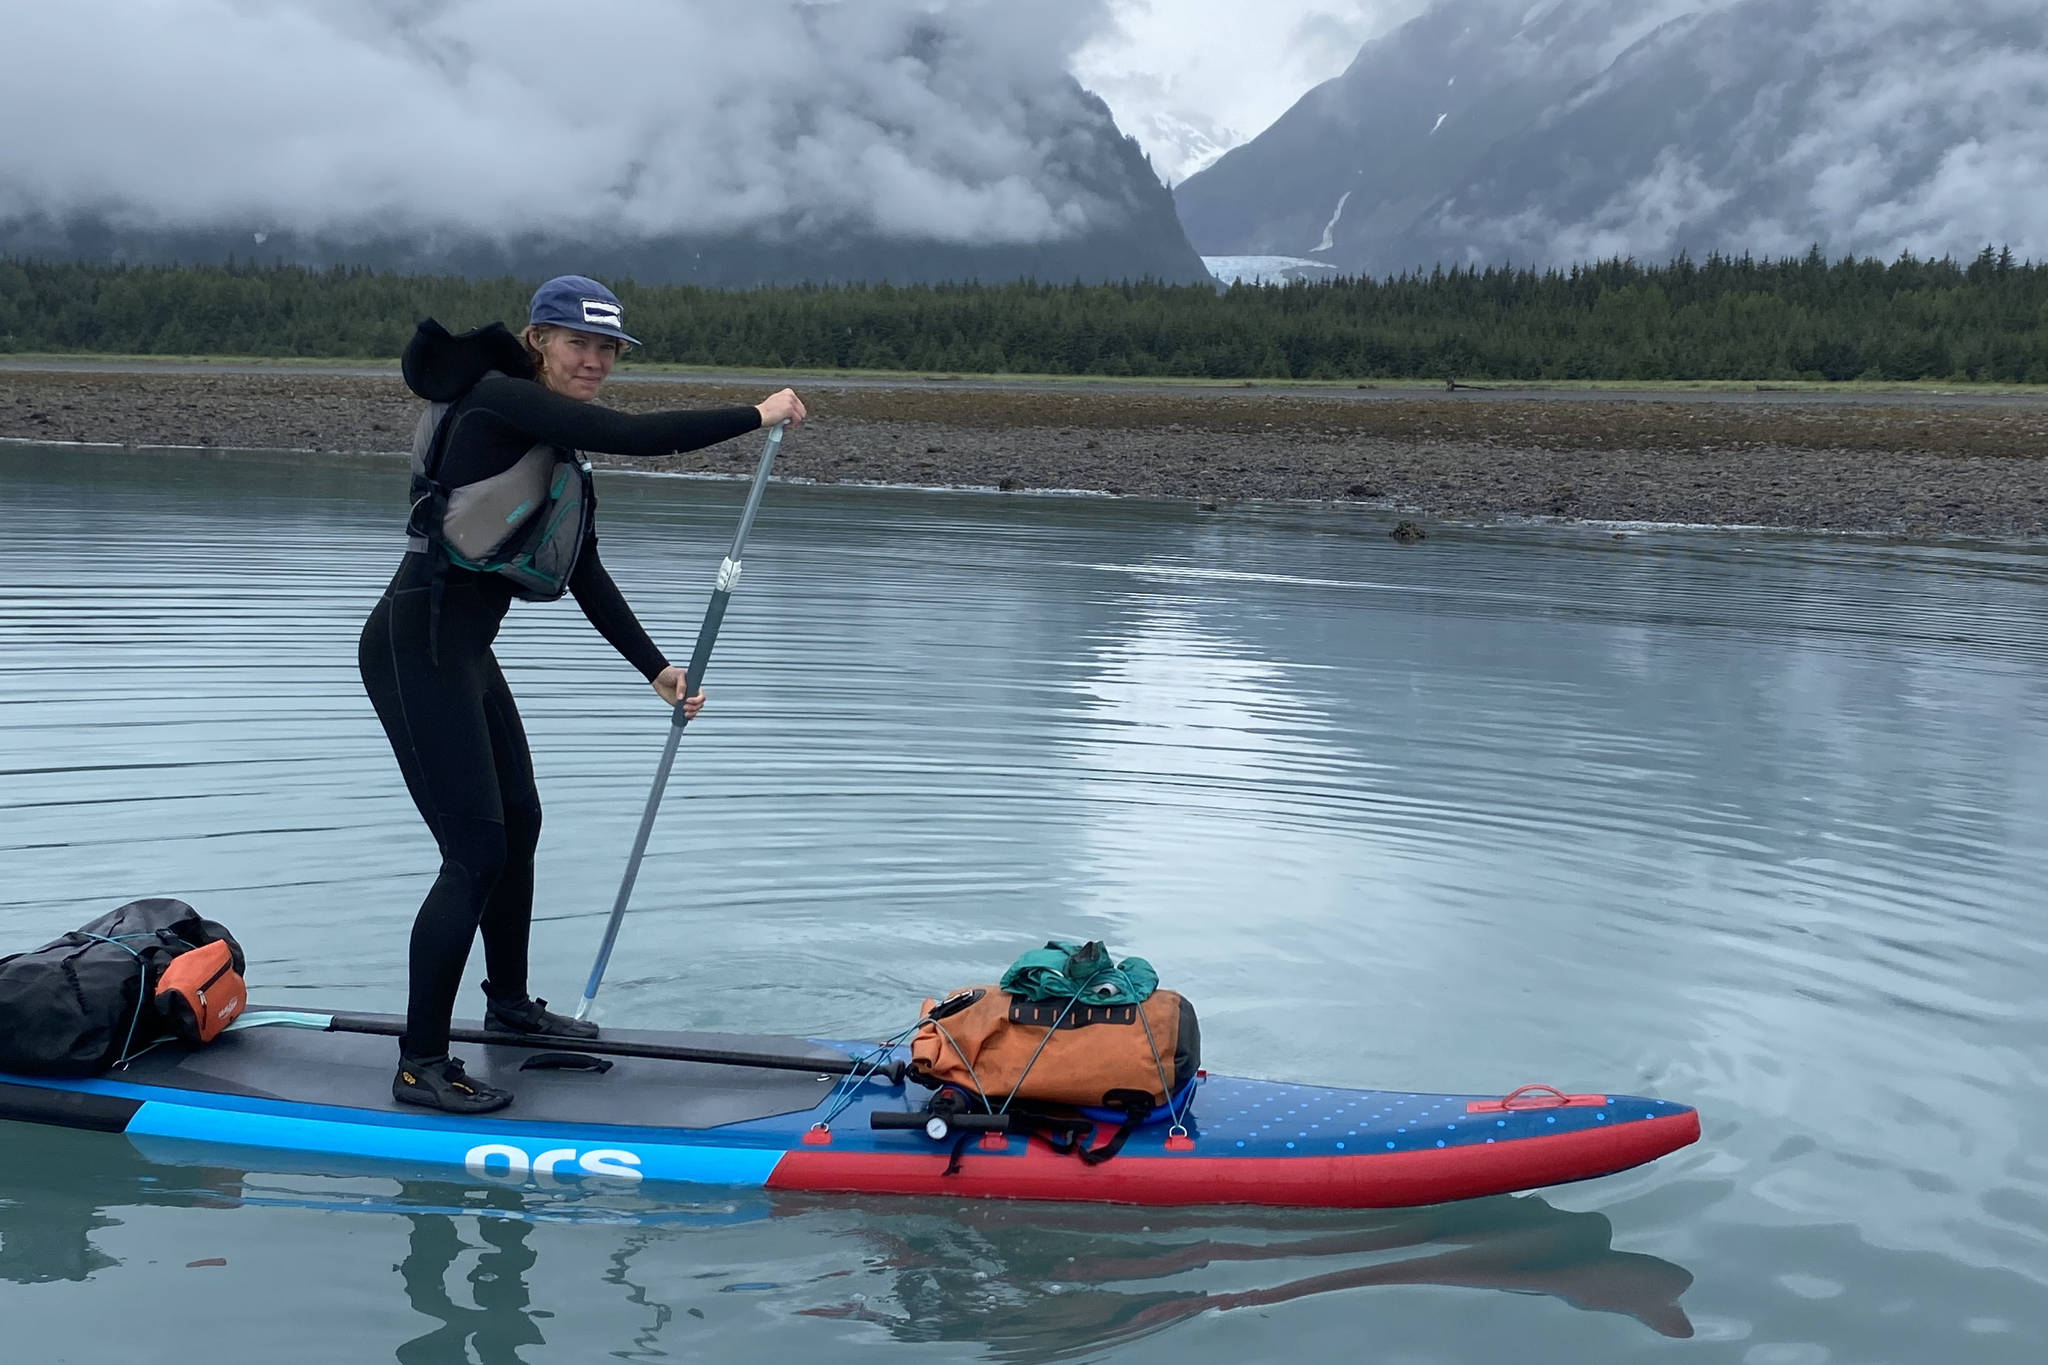 Courtesy photo | Kaitlyn Tolin                                 Kaitlyn Tolin paddled with partner Amanda Painter from Juneau to Haines over three days in early July. They said they were inspired by friends who had made similar paddleboard trips.